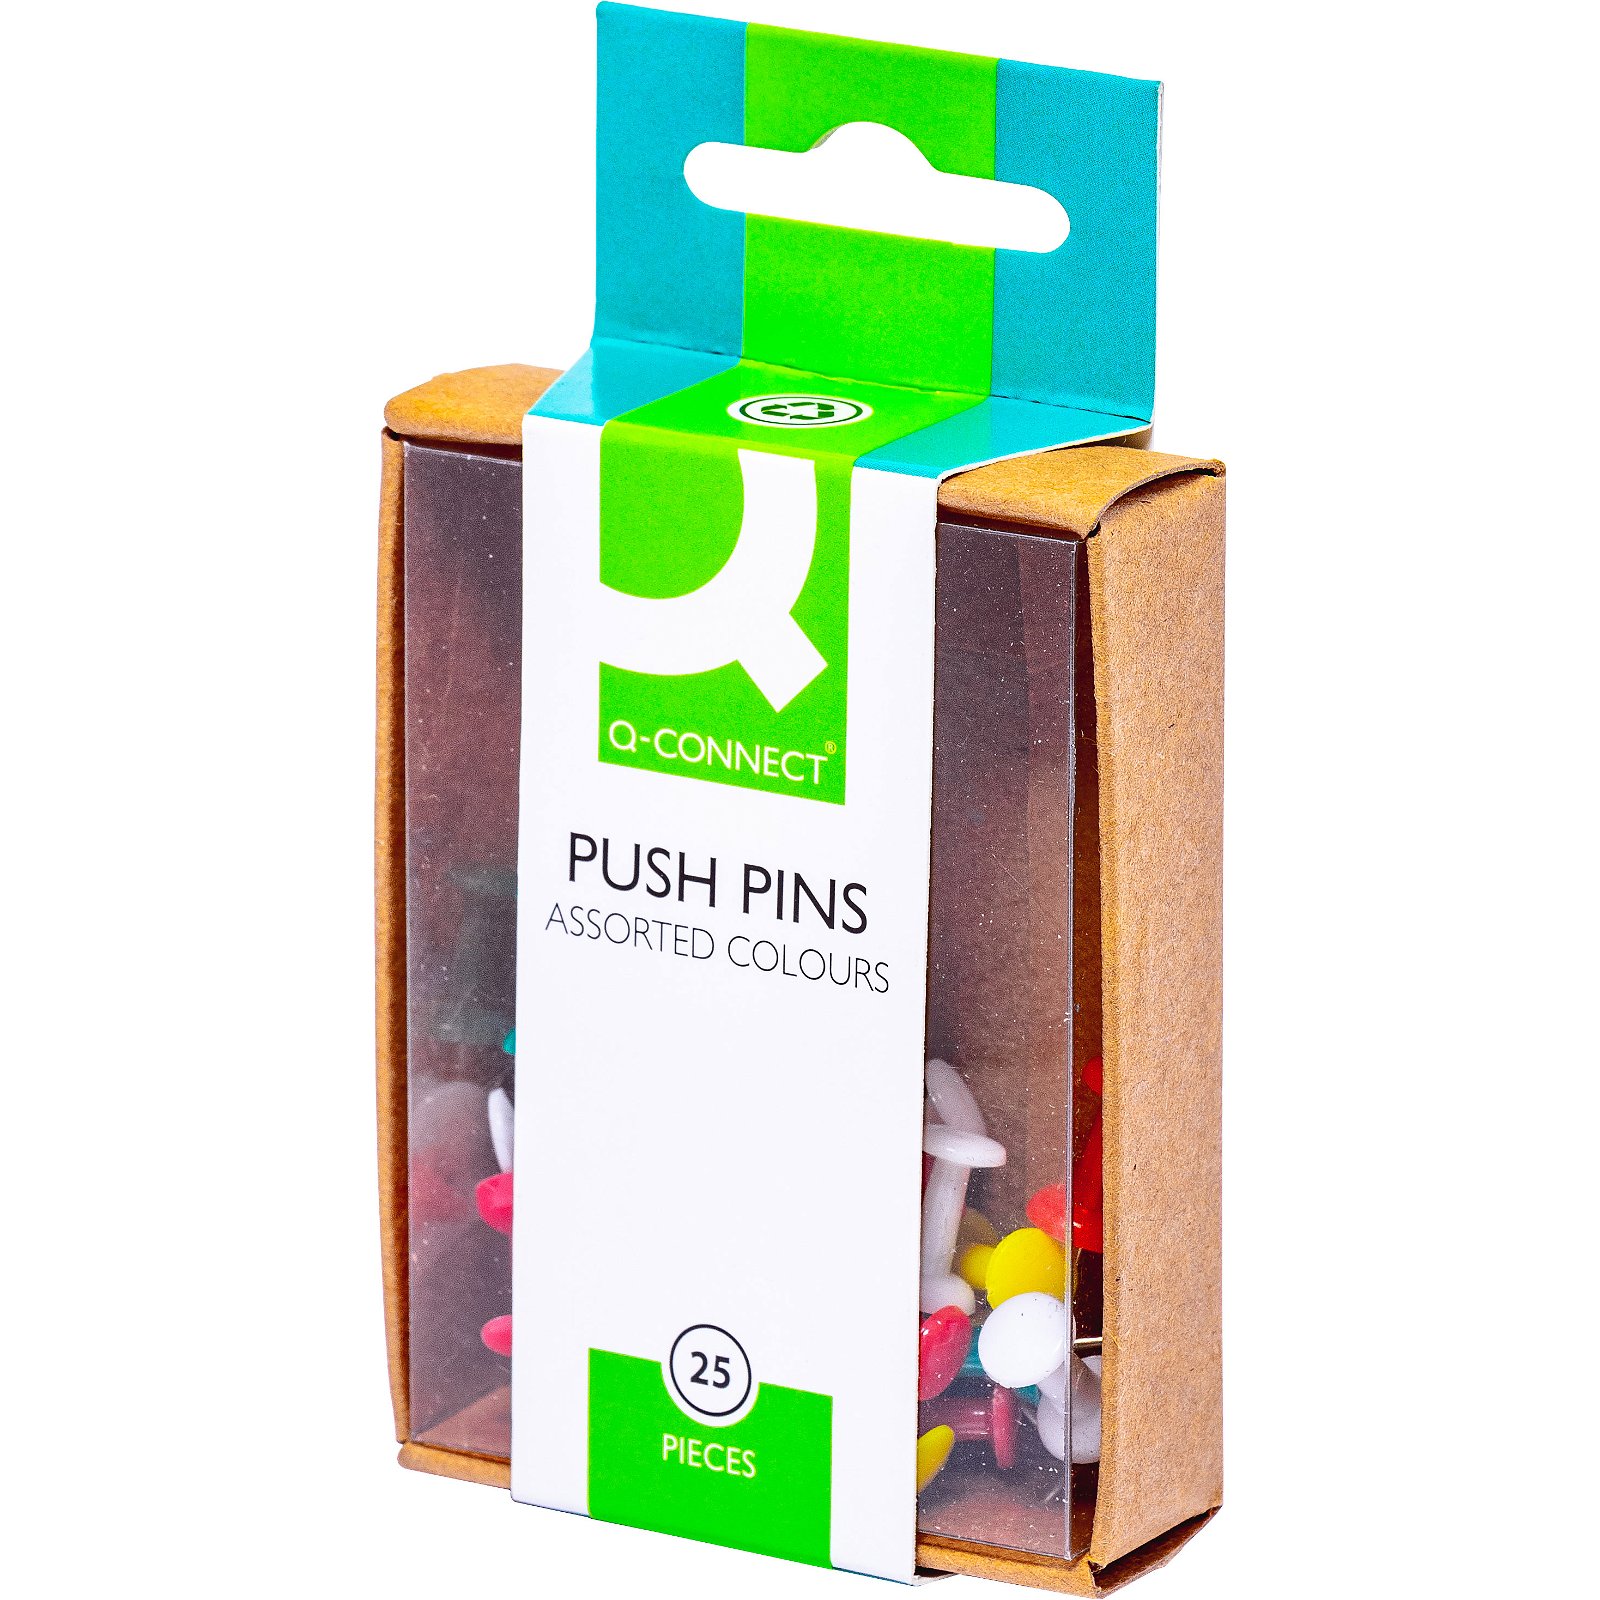 Q-connect Push Pins assorterede farver 25stk